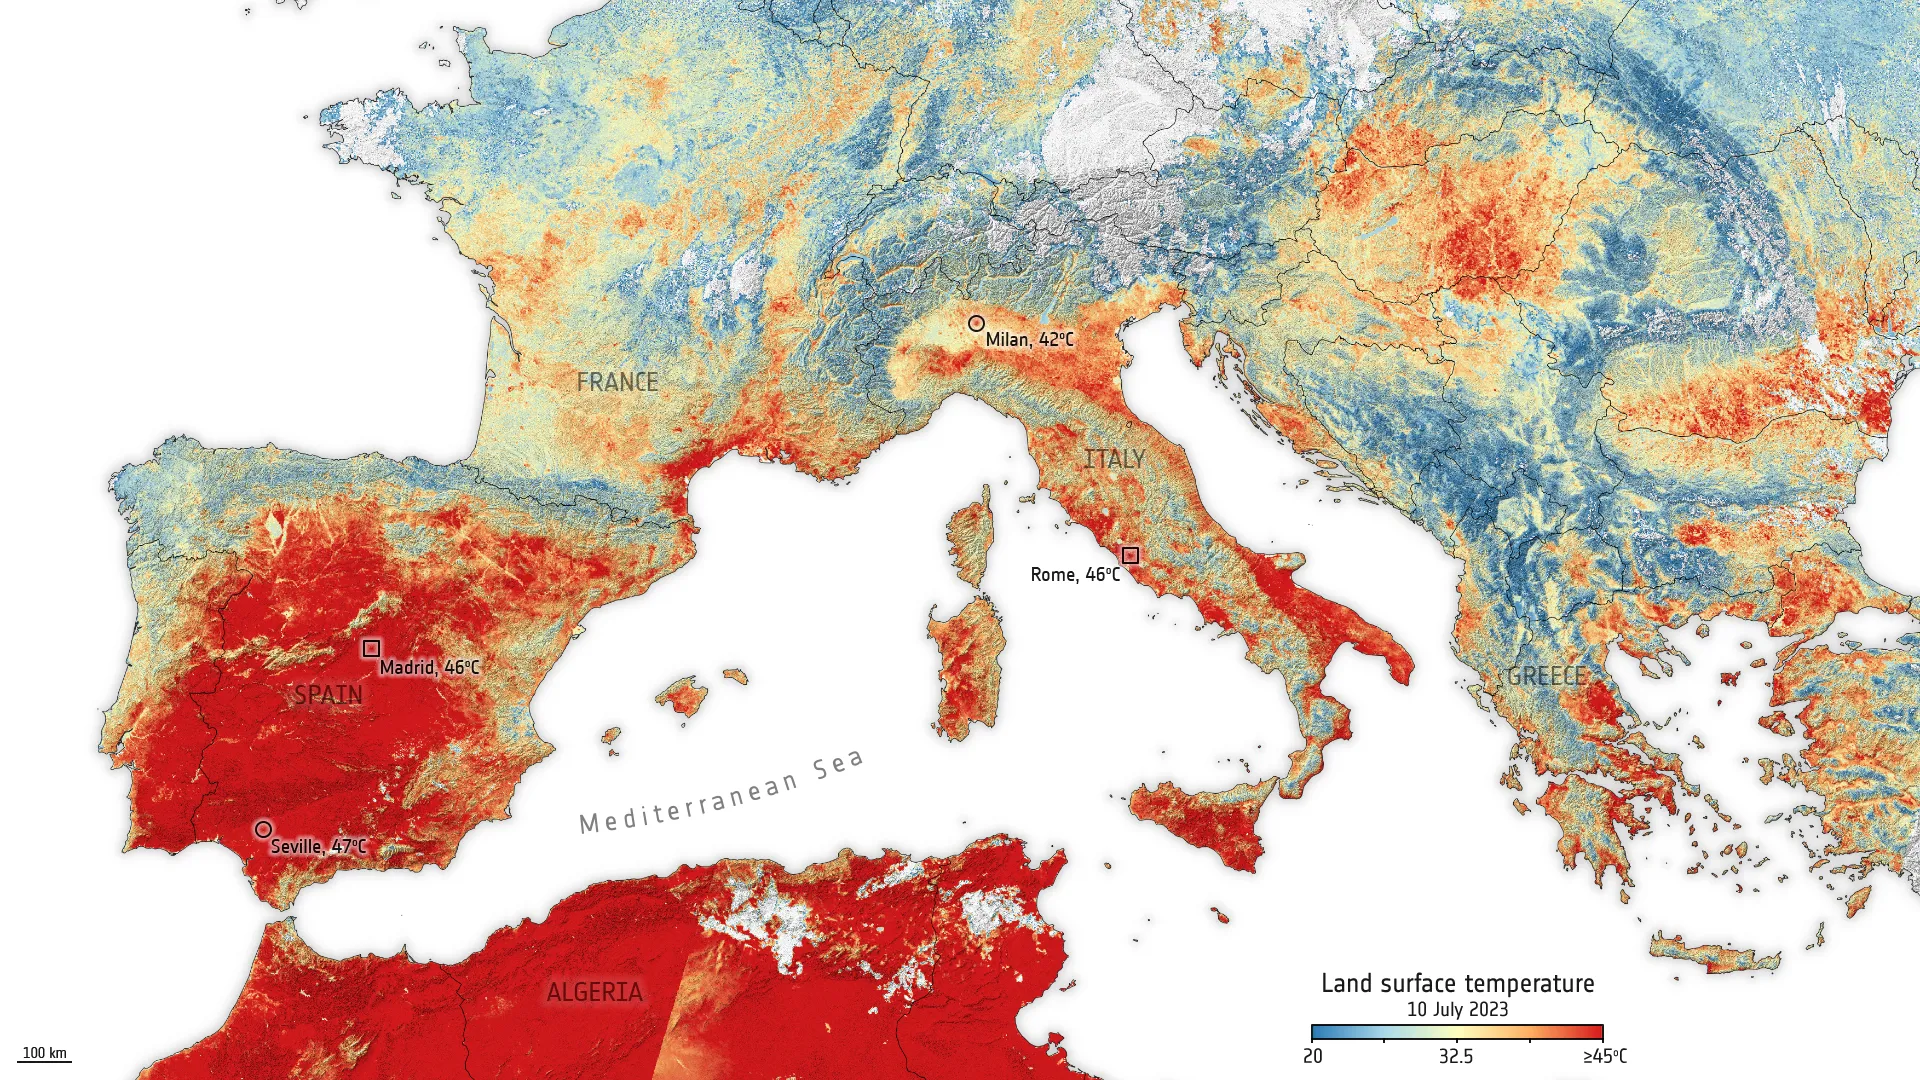 Europe's unprecedented heatwaves unlike any other in history